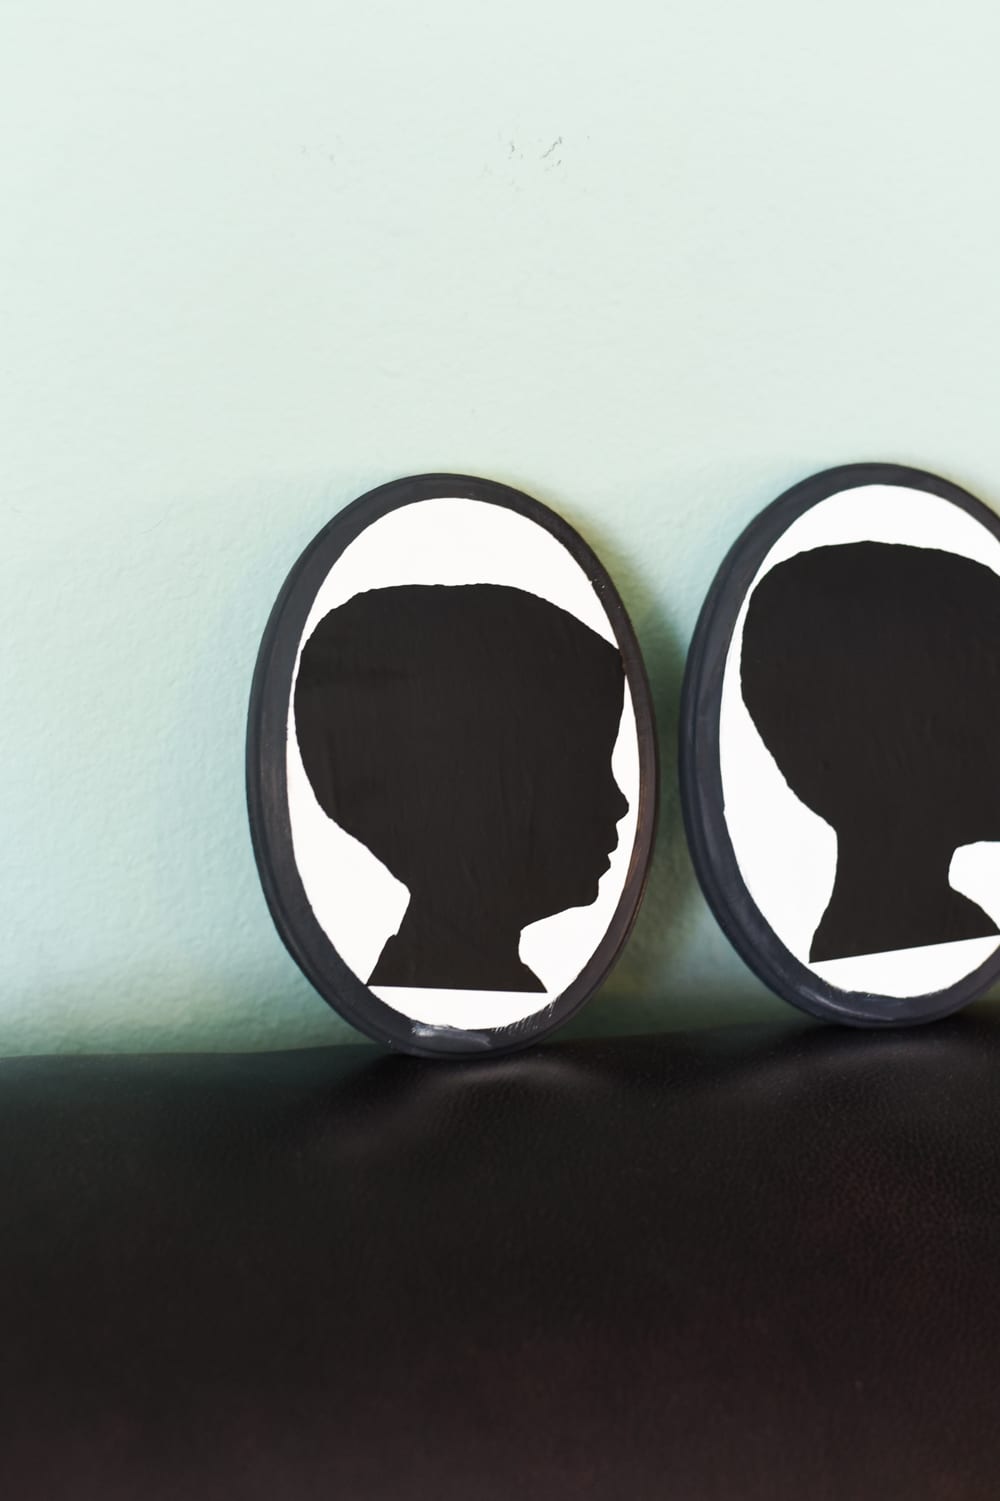 two silhouette portraits on coach by green wall